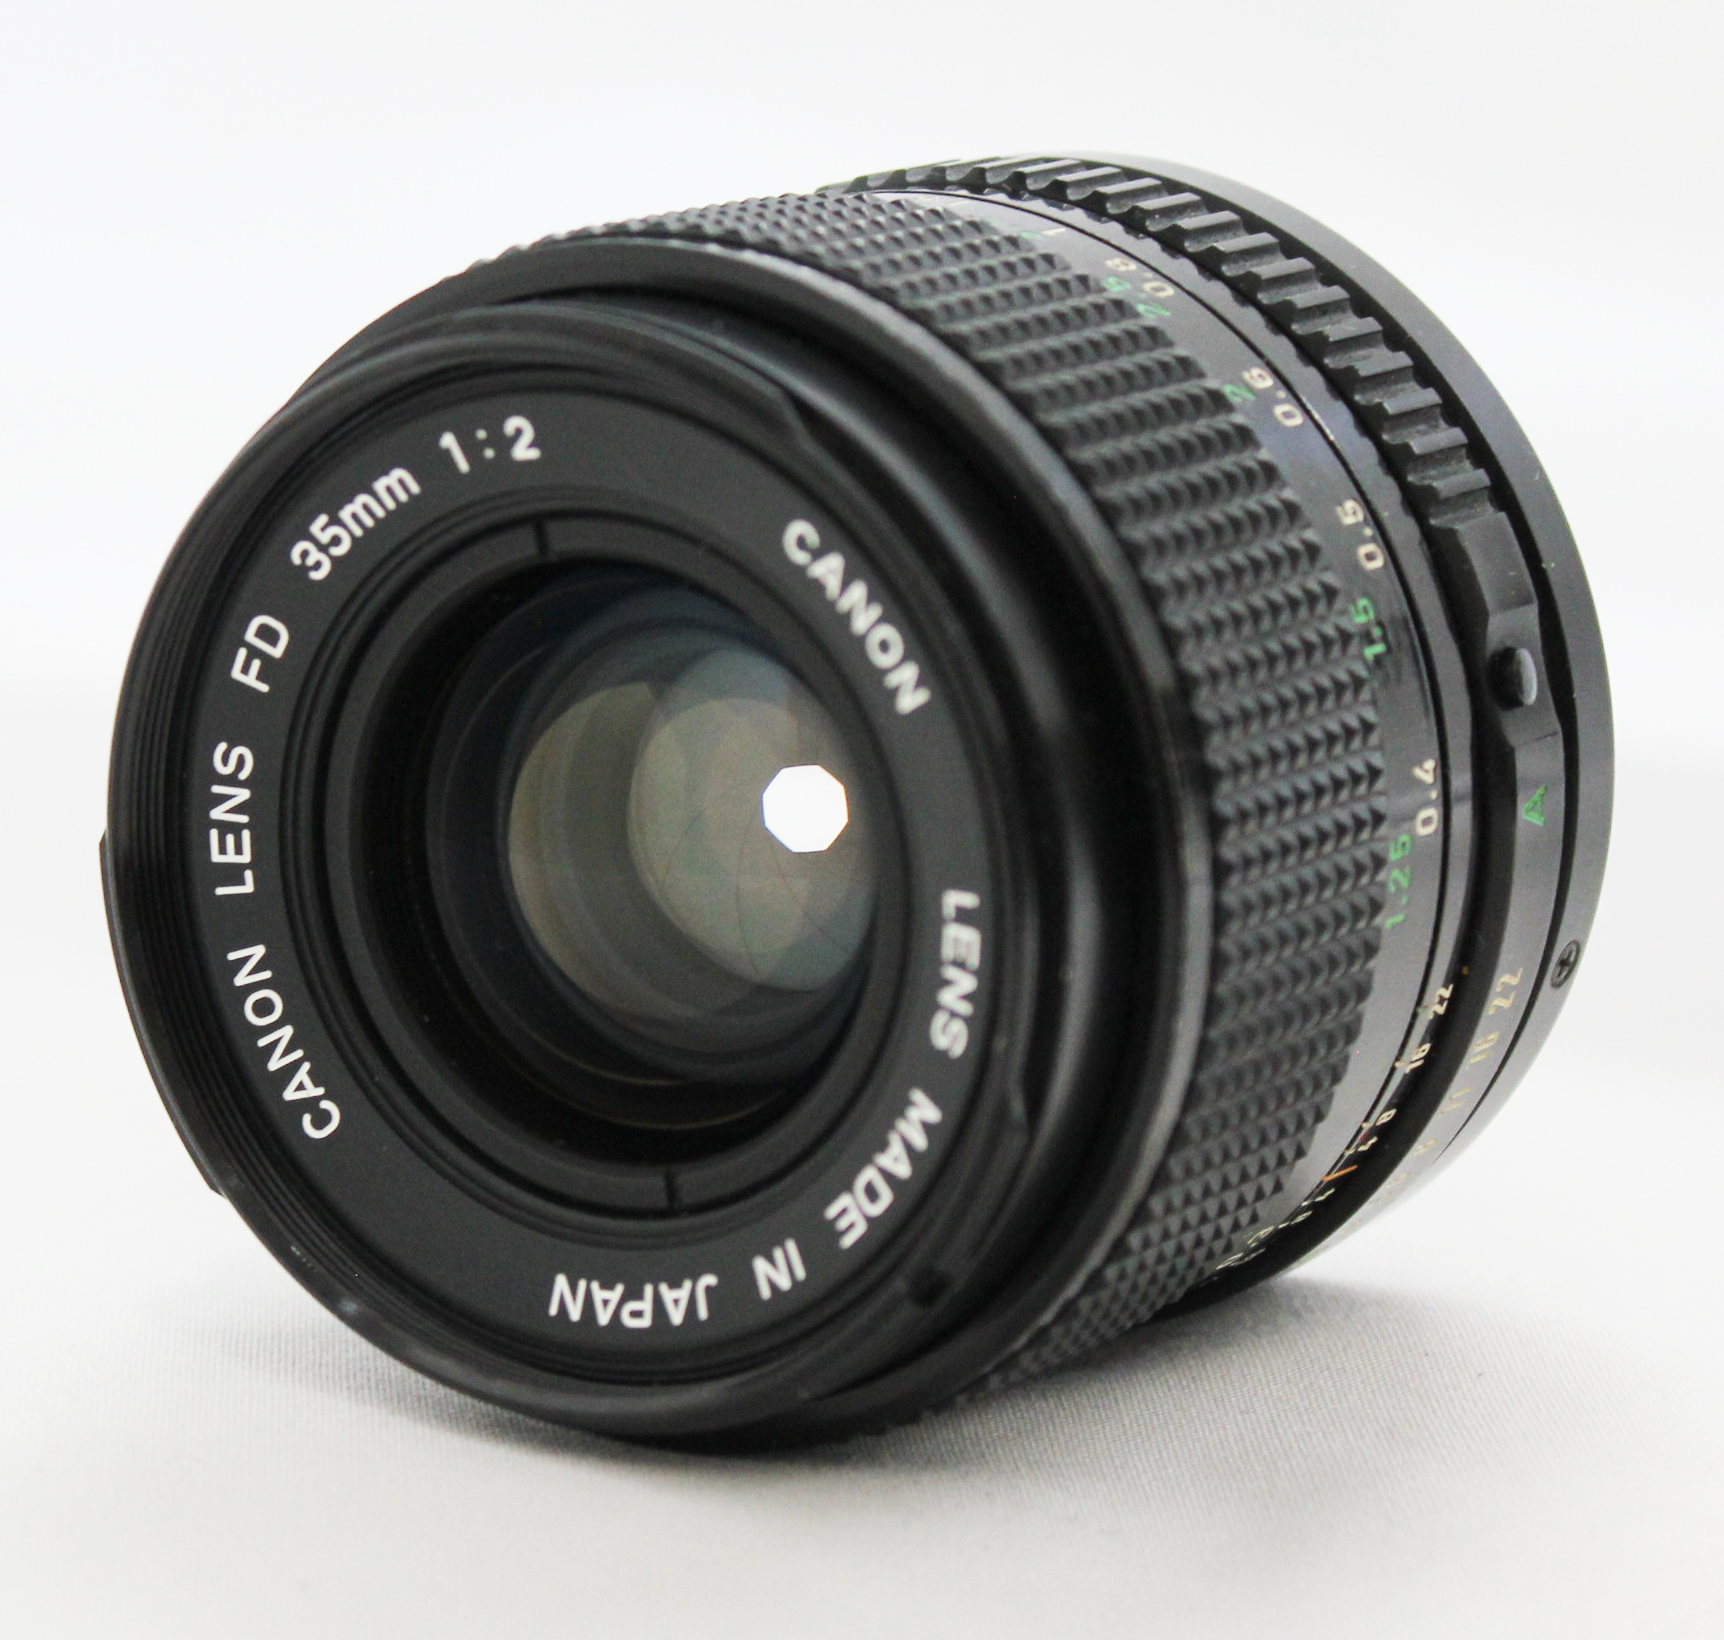 Japan Used Camera Shop | [Excellent++++] Canon New FD NFD 35mm F/2 MF Wide Angle Lens from Japan